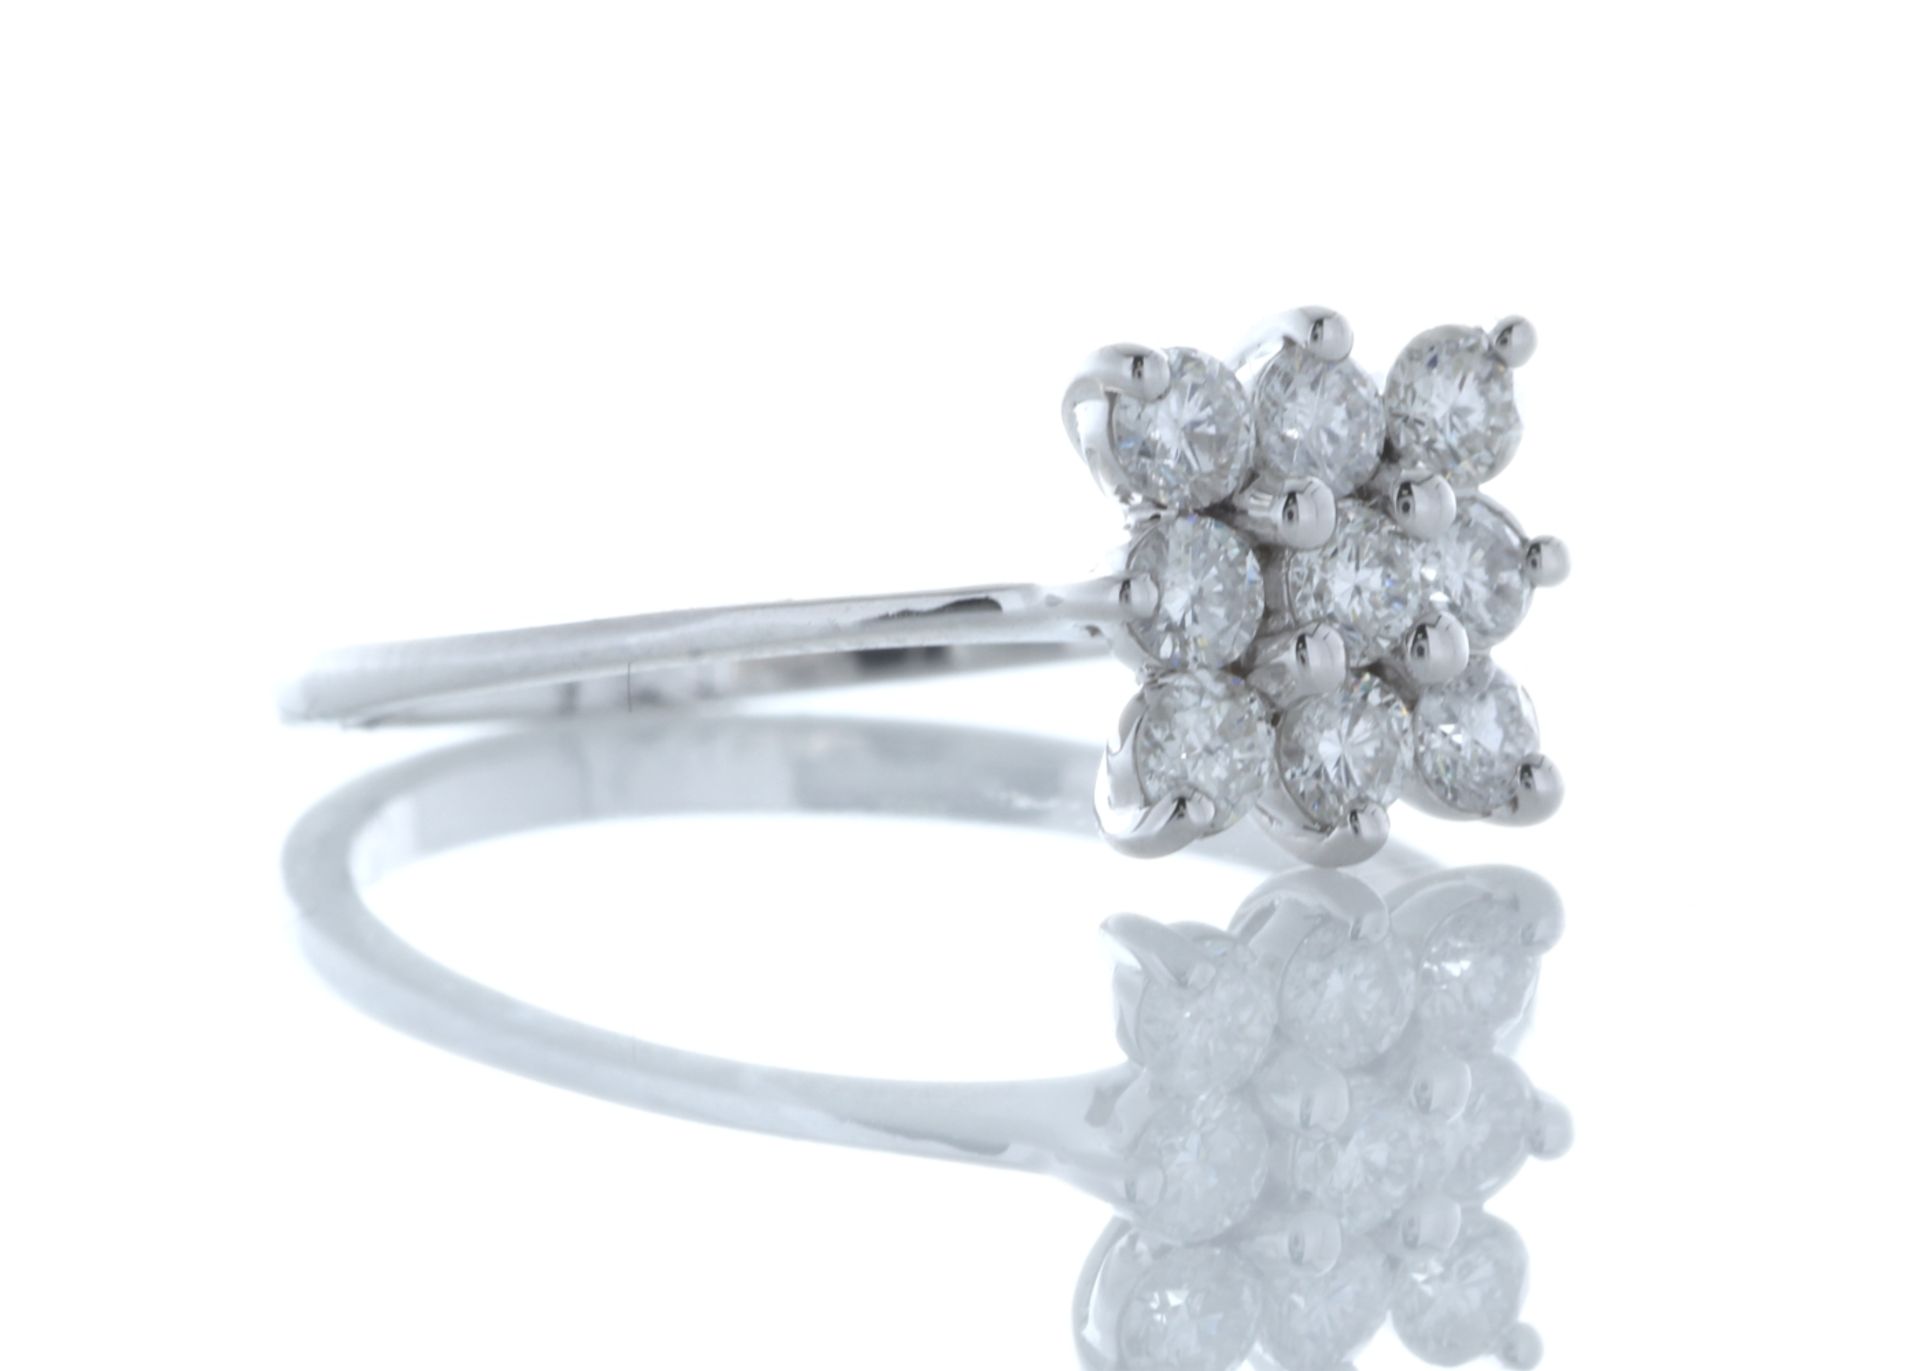 18ct White Gold Fancy Cluster Diamond Ring 0.45 Carats - Valued by GIE £6,295.00 - This ring - Image 4 of 5